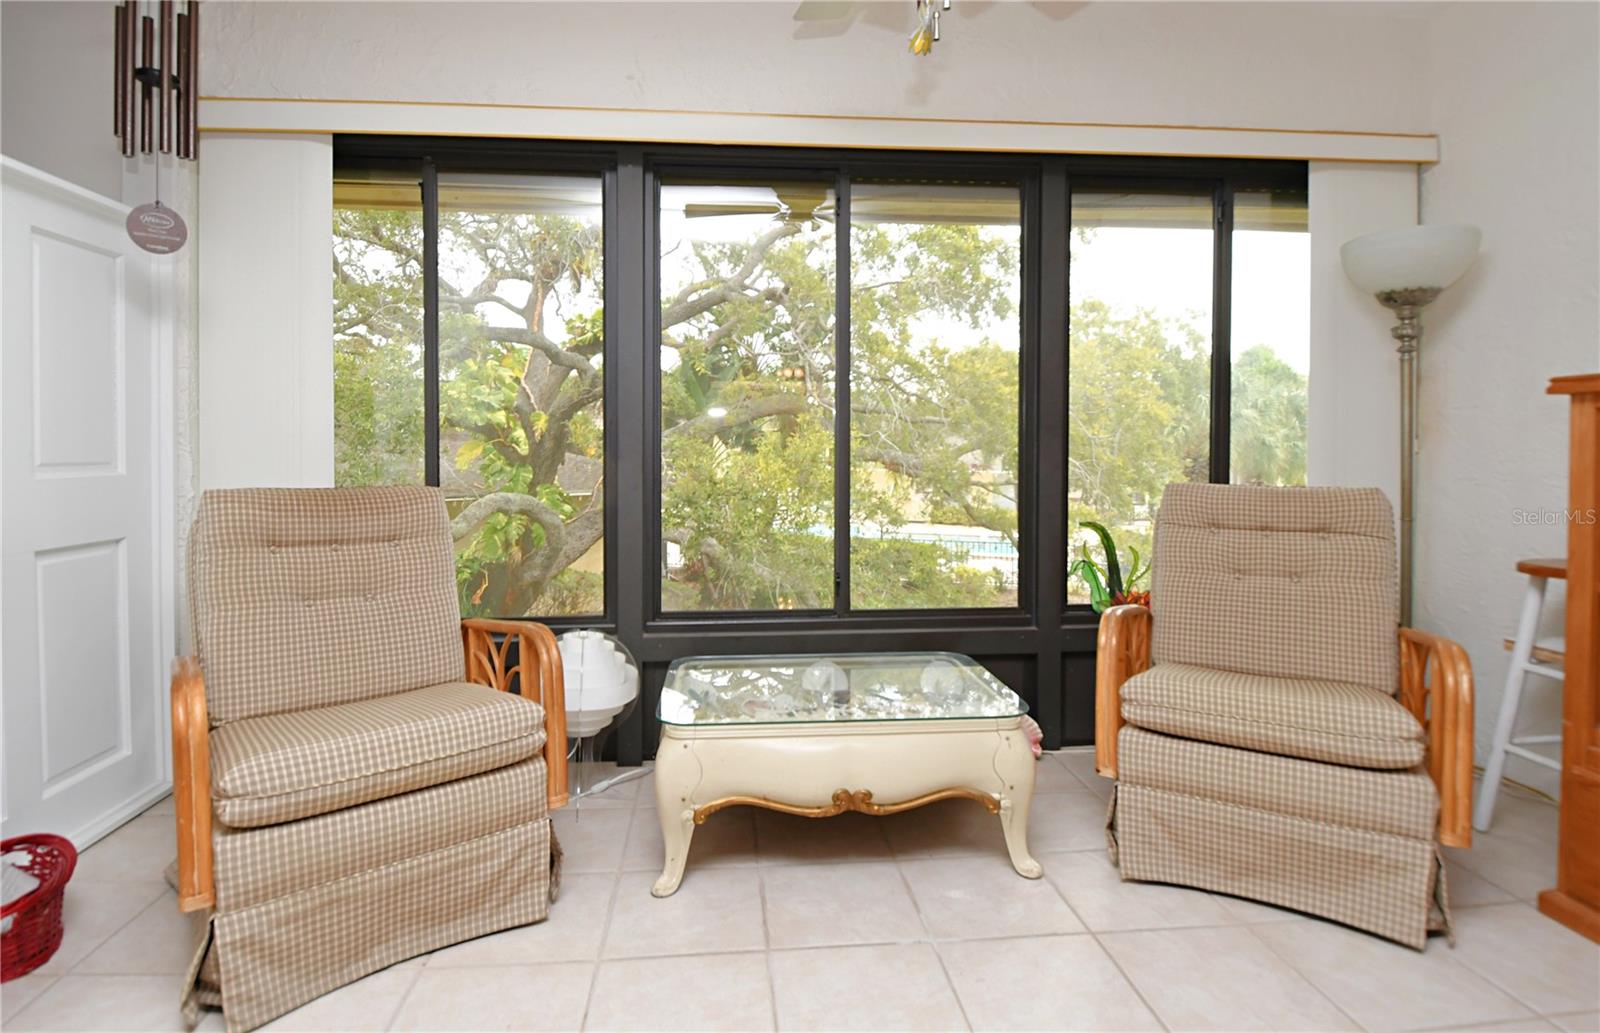 The Florida room provides a lovely view of the pool and surrounding greenery. Great area to watch beautiful sunrises every day! With double pane windows and hurricane shutters, this condo ensures safety and comfort.